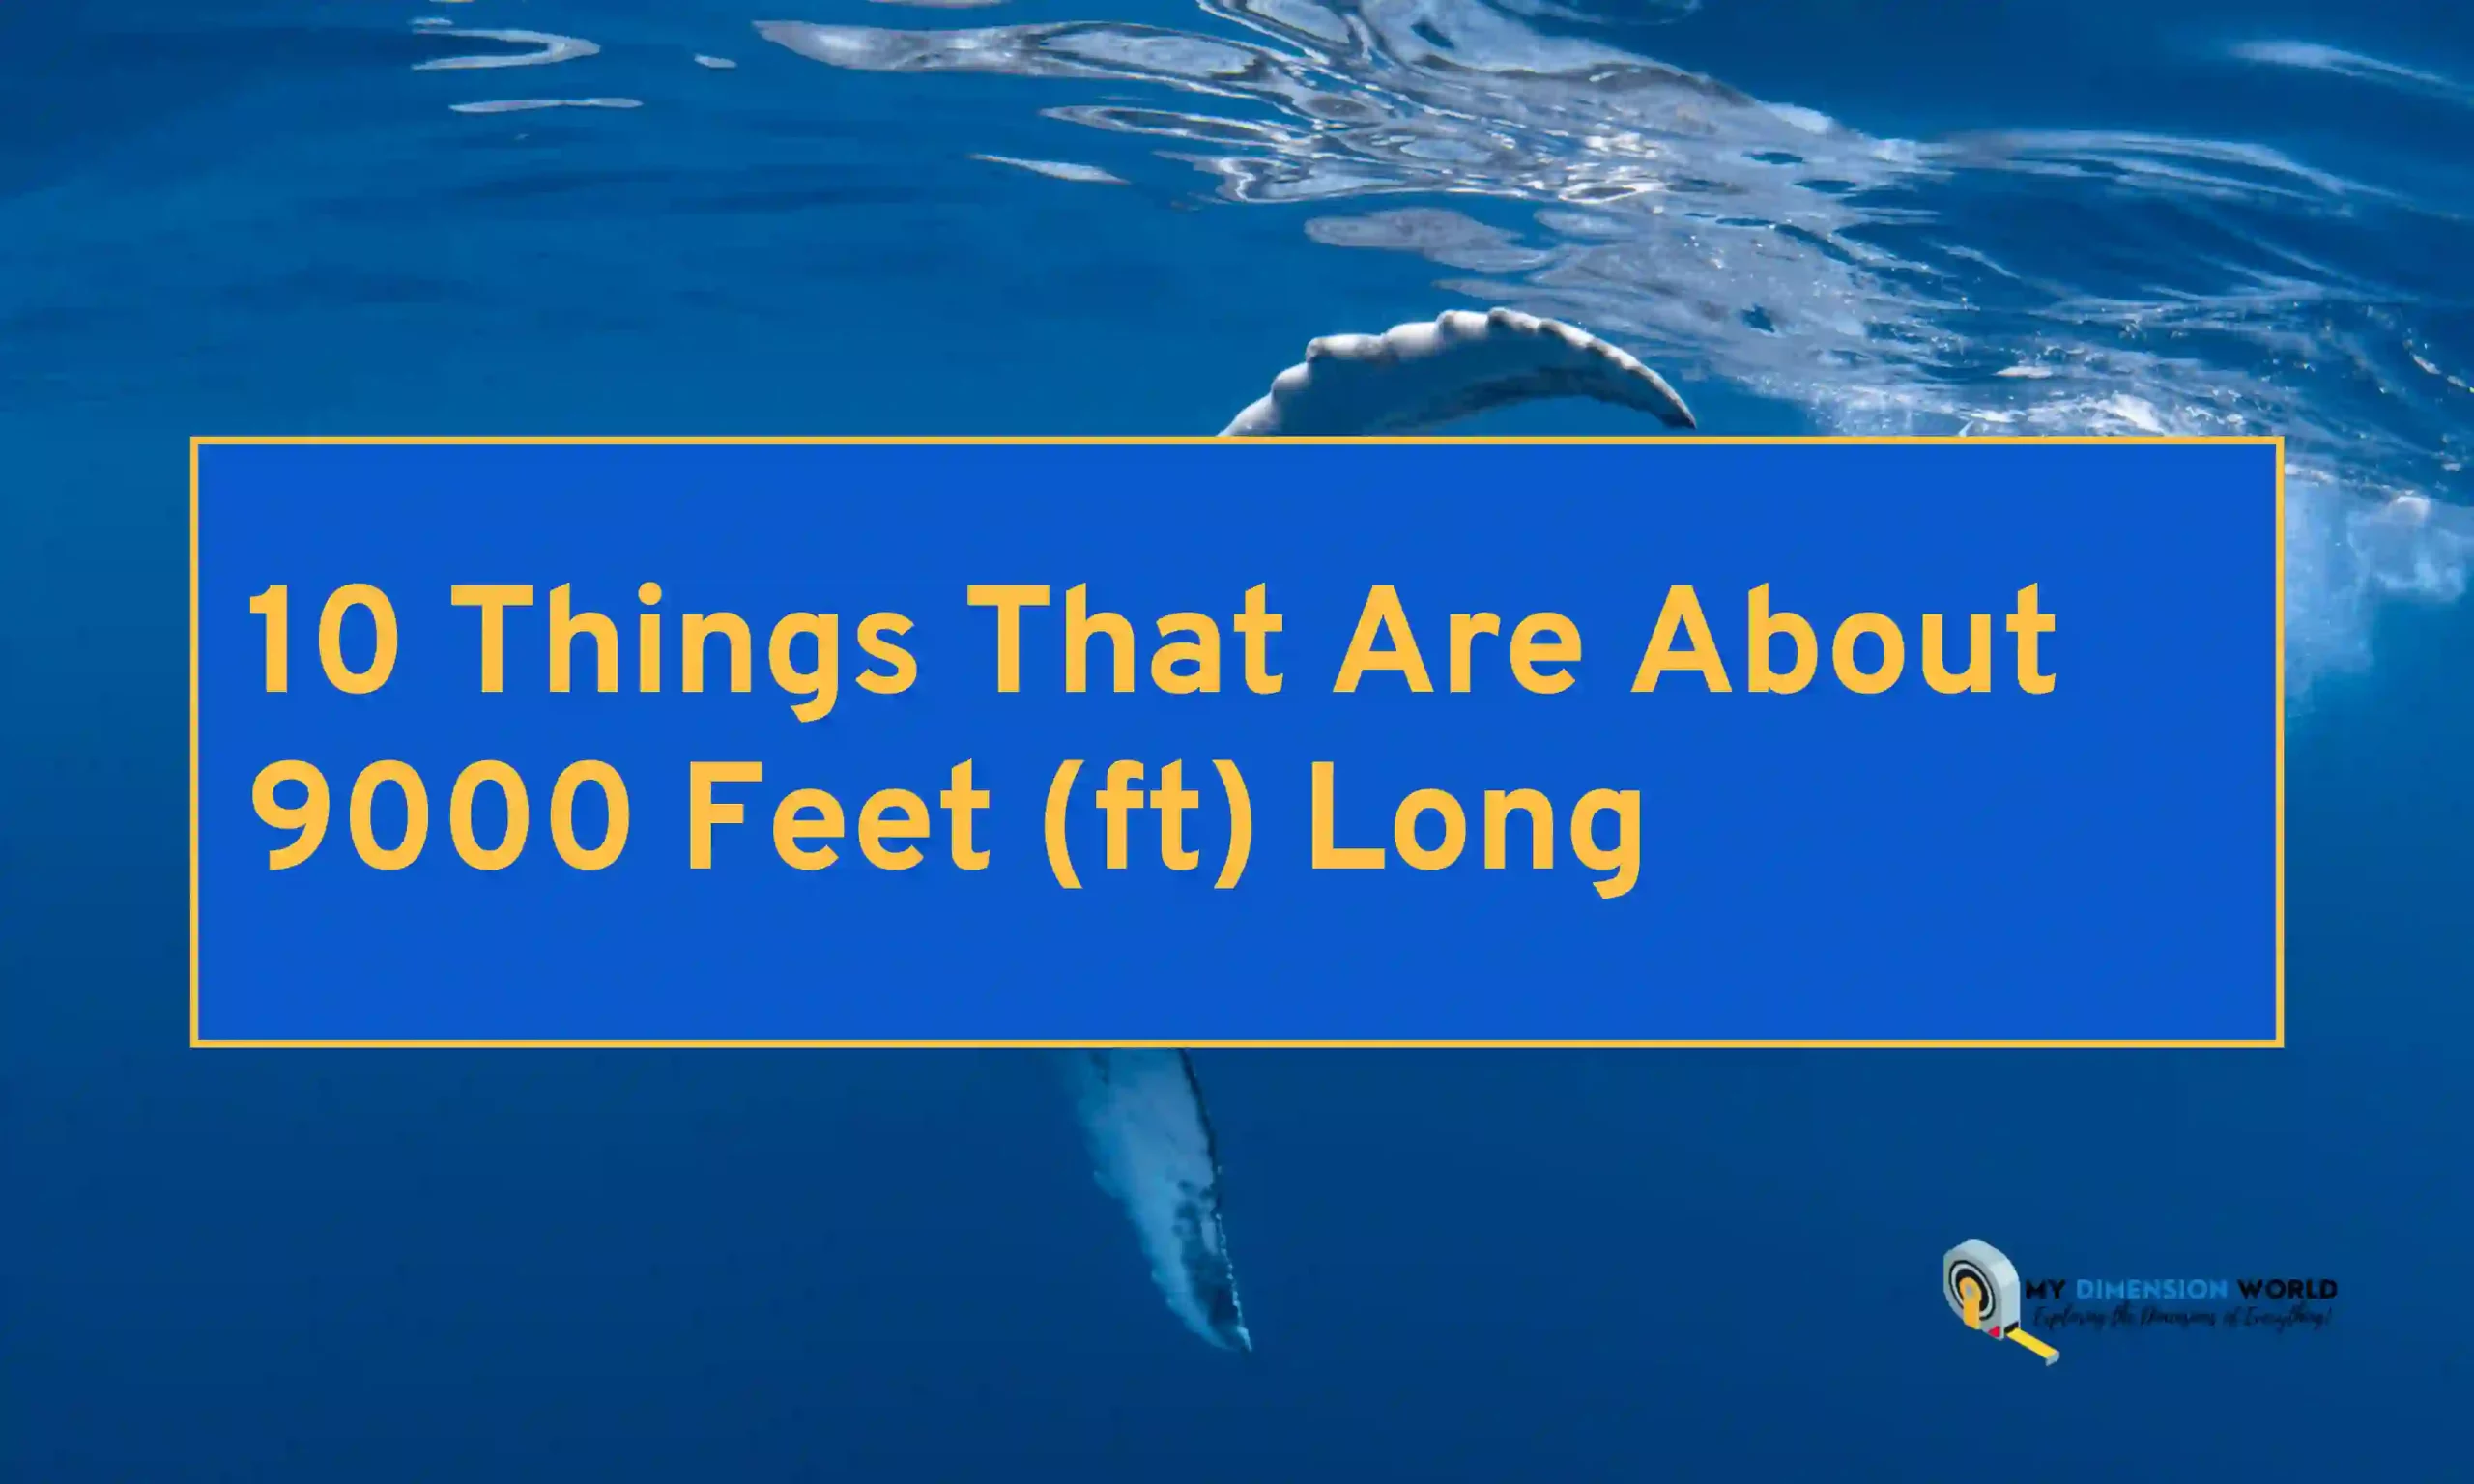 10 Things That Are About 9000 Feet (ft) Long